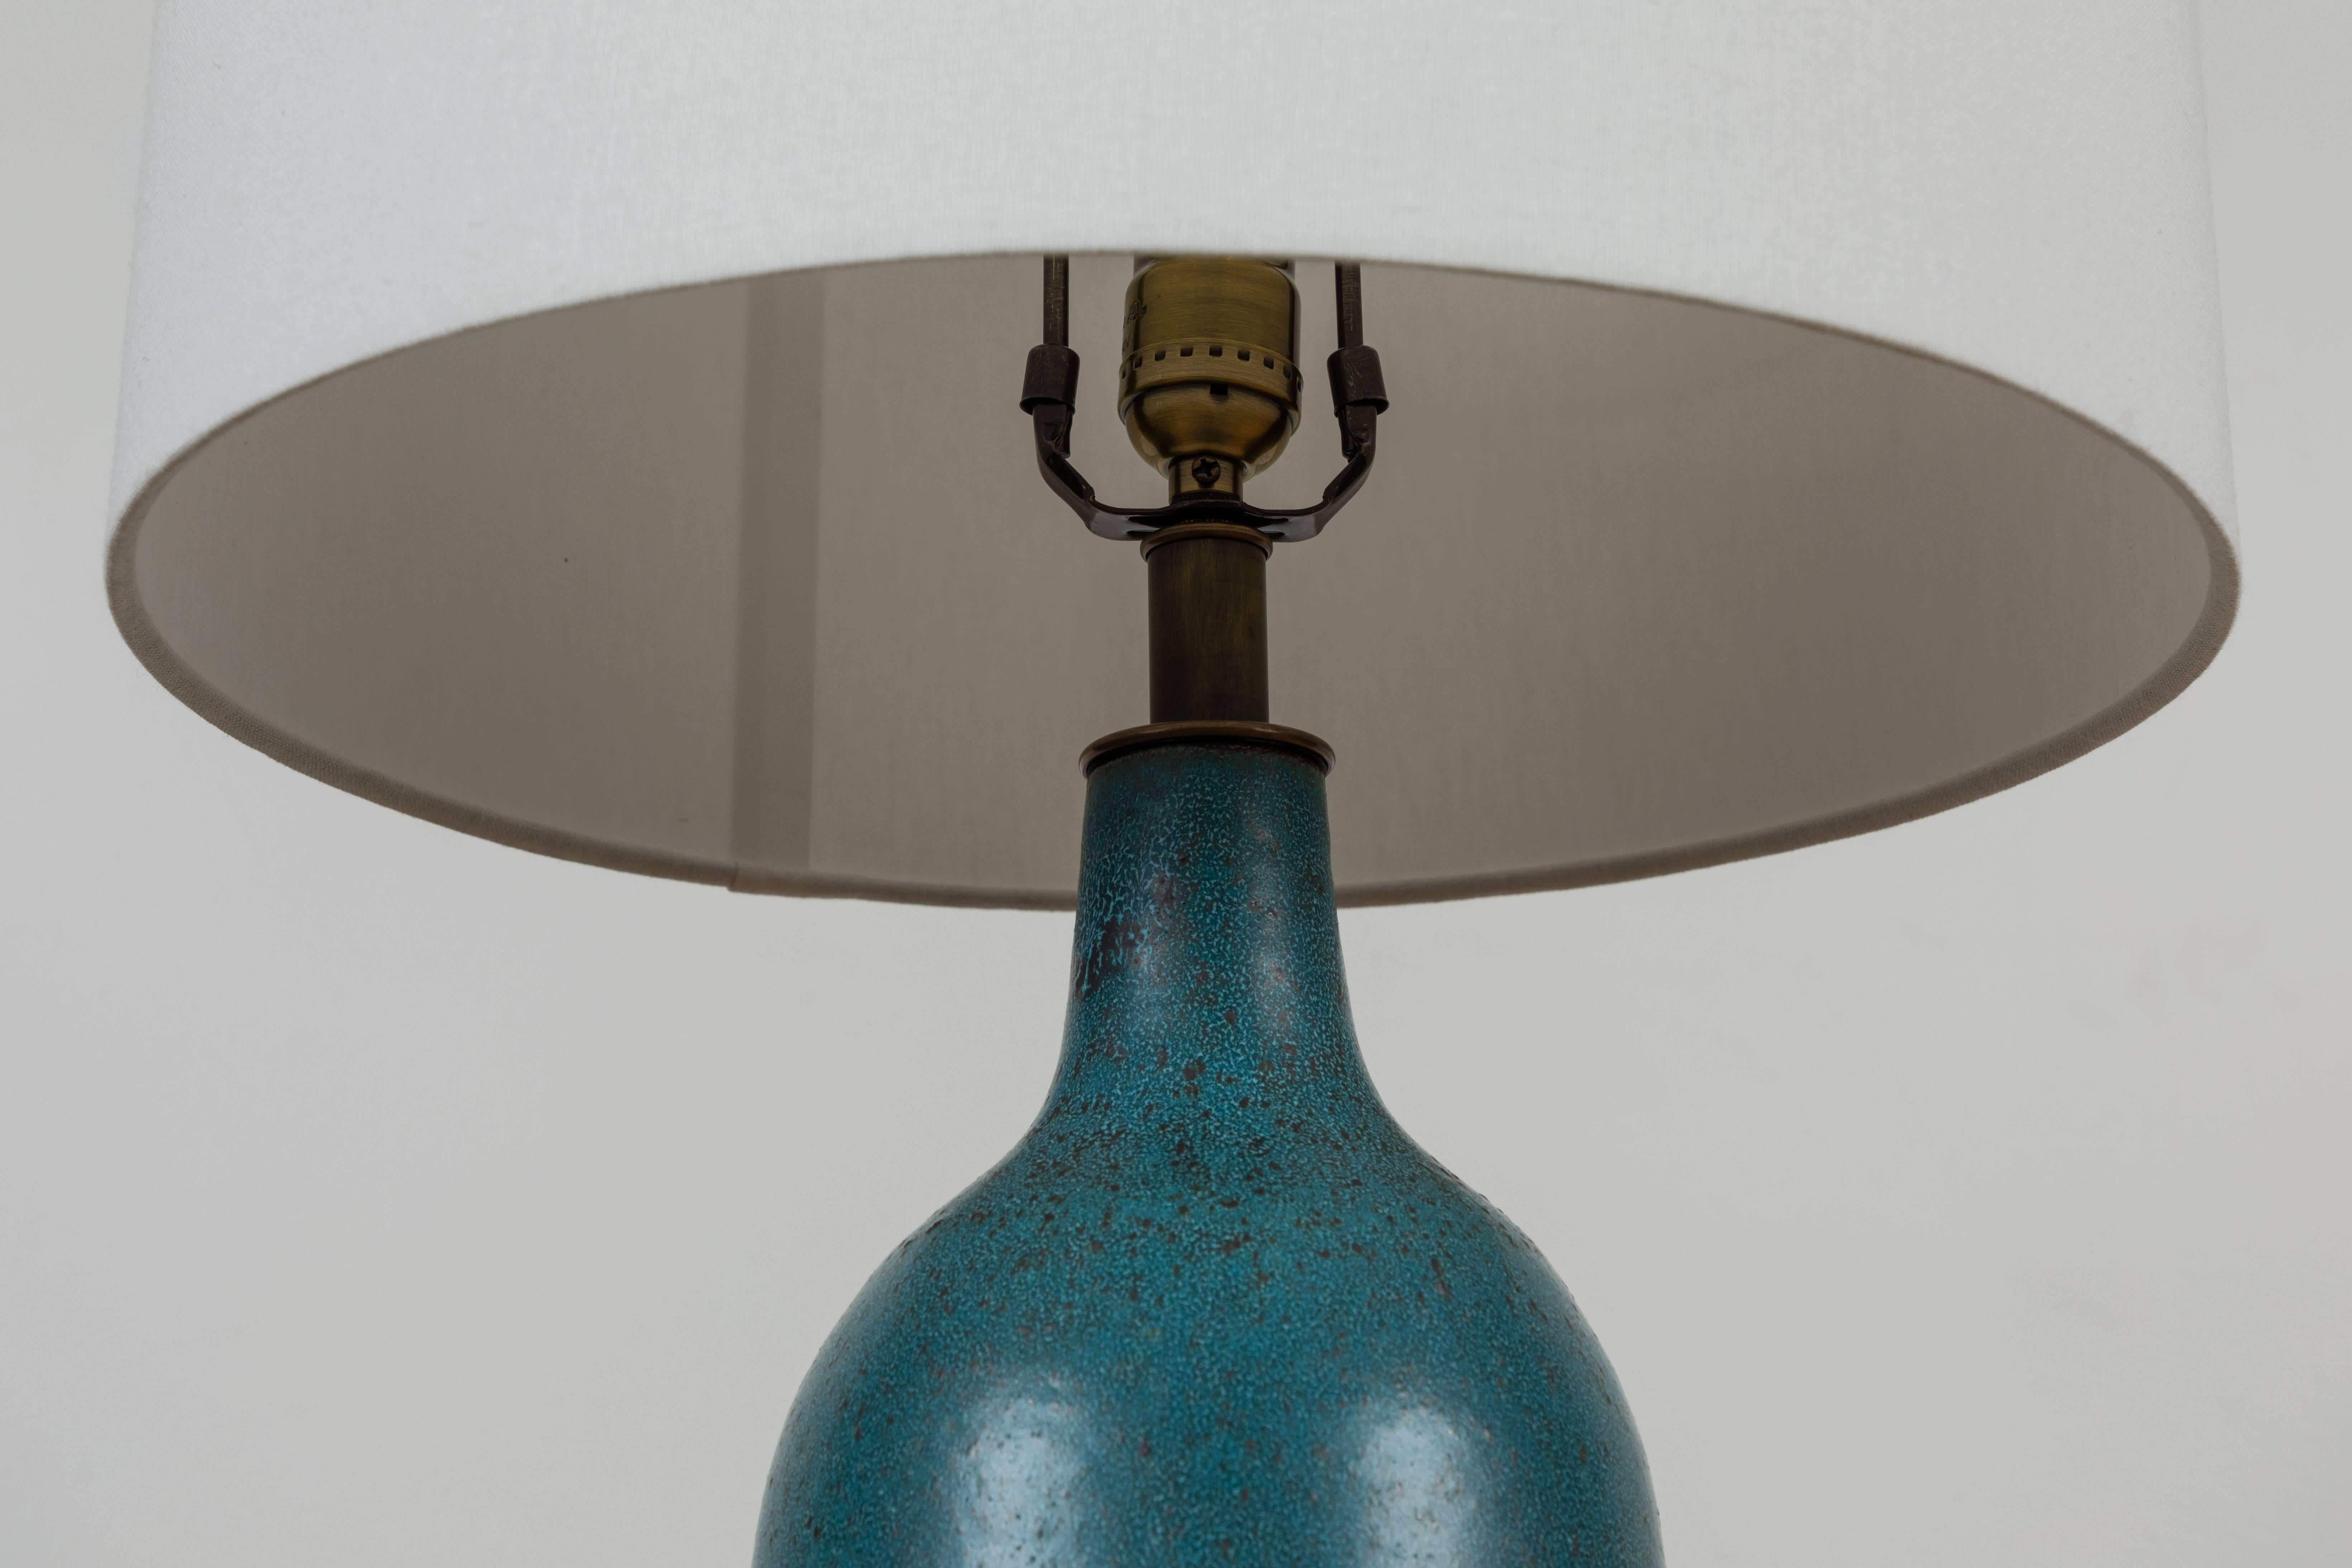 American Extra Large Turquoise Bottle Lamp by Victoria Morris for Lawson-Fenning